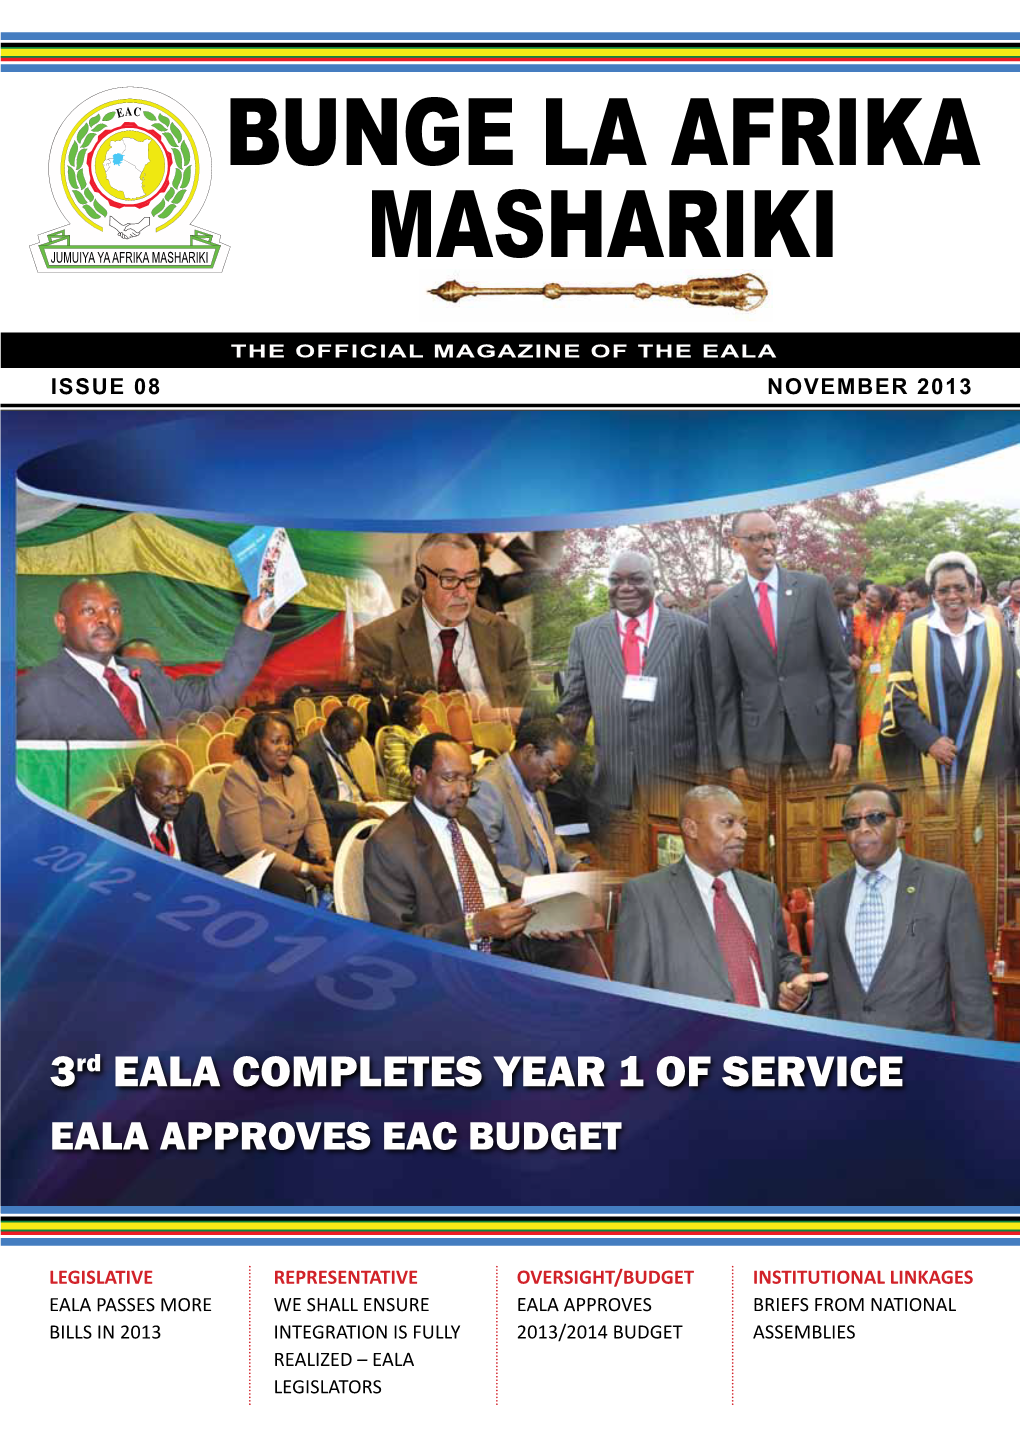 3Rd EALA COMPLETES YEAR 1 of SERVICE EALA APPROVES EAC BUDGET